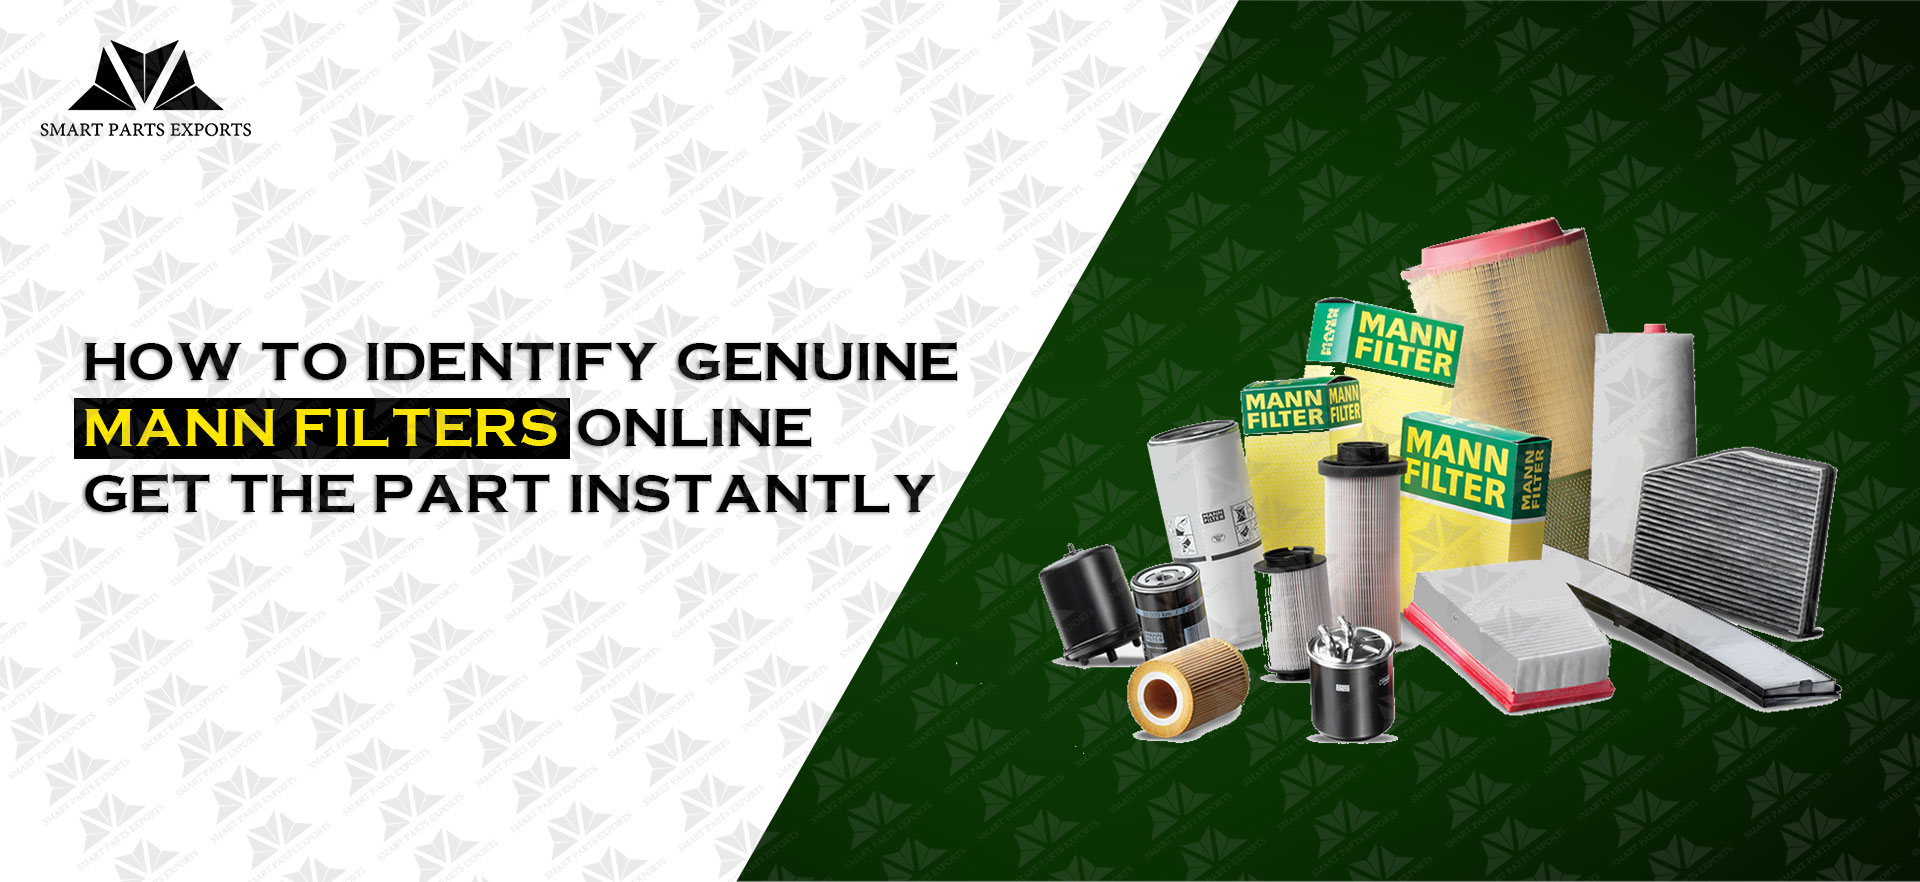 How to Identify Genuine Mann Filters Online: Get the Part Instantly 